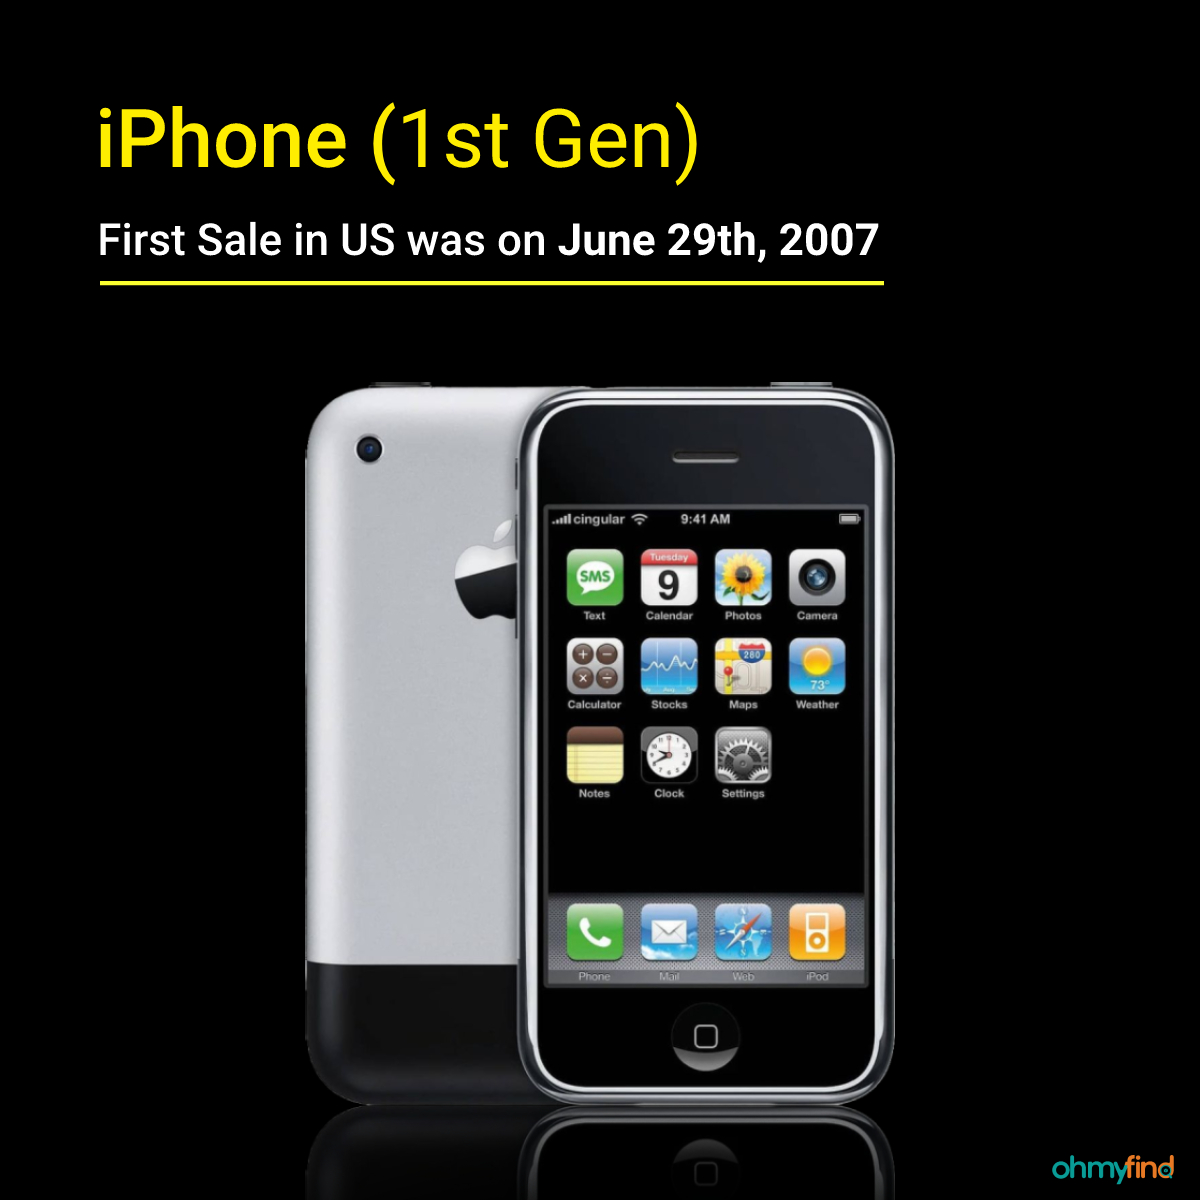 ohmyfind on Twitter: "On day #iPhone 1st Gen on sale in the United States on June 2007. https://t.co/moMln7mr4m" / Twitter